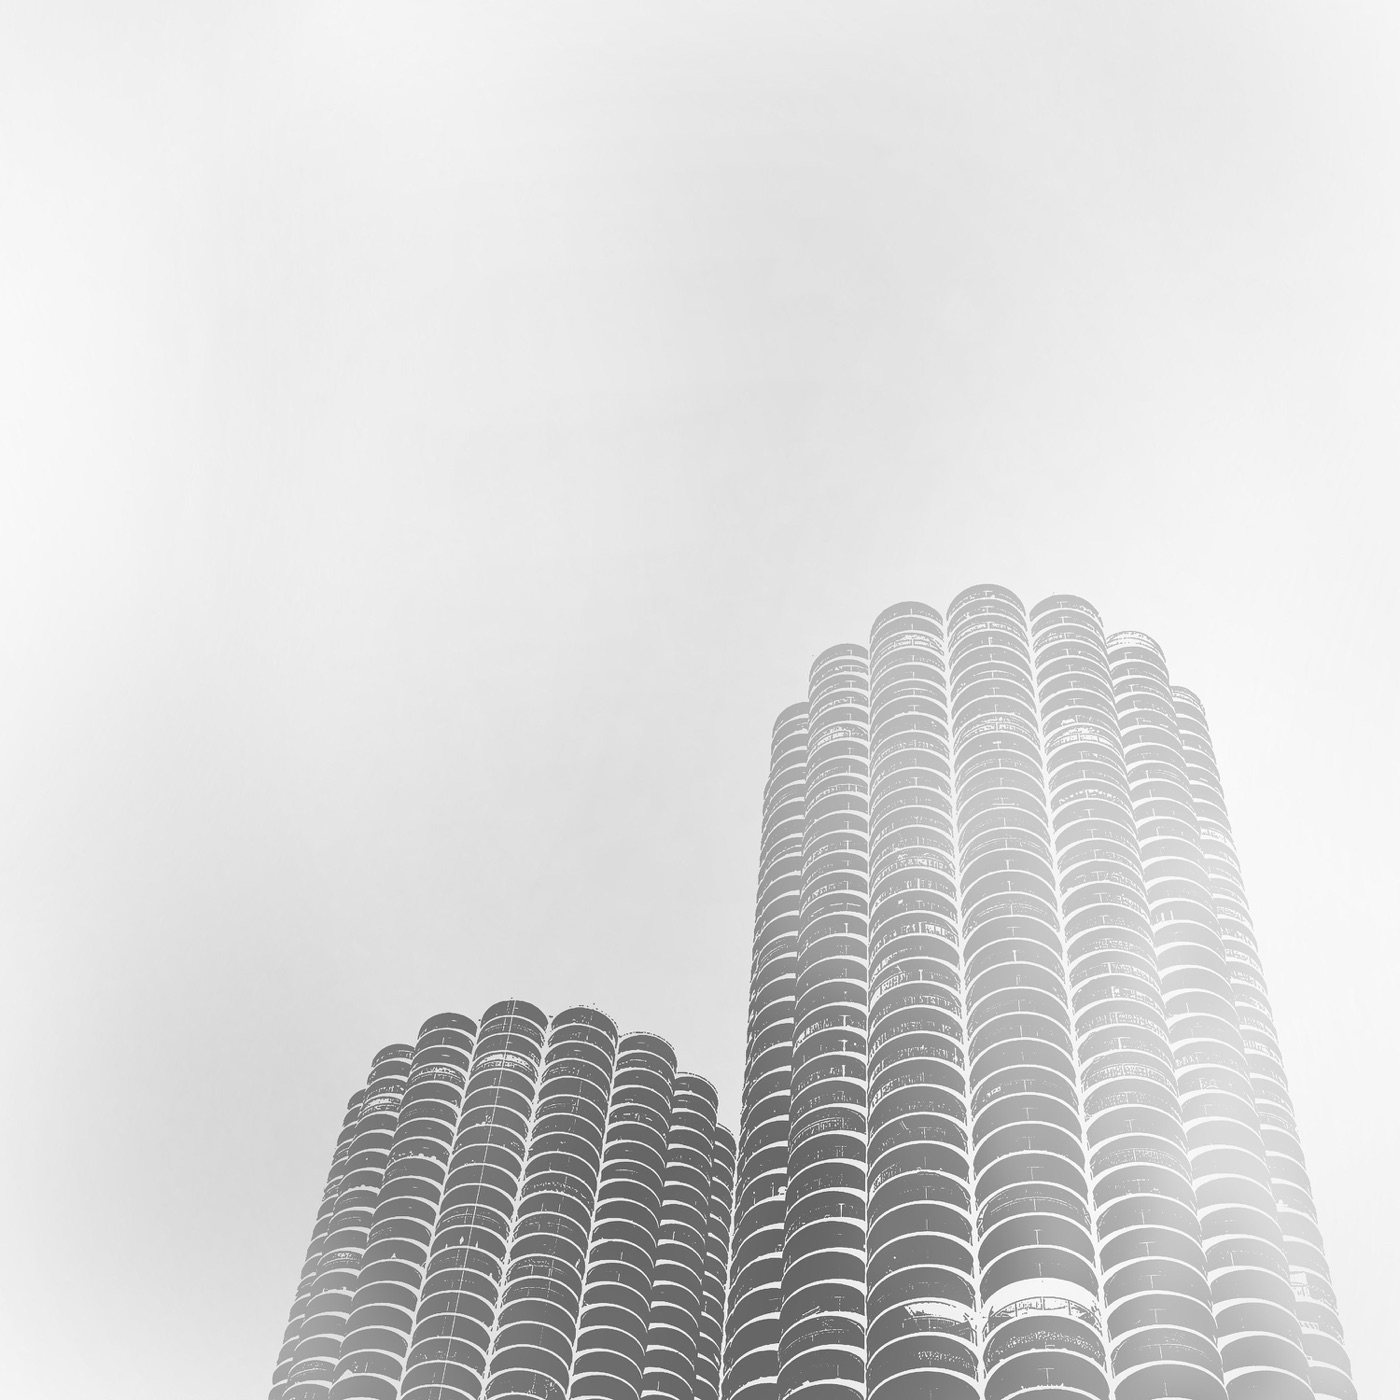 Yankee Hotel Foxtrot by Wilco, Yankee Hotel Foxtrot (Deluxe Edition)